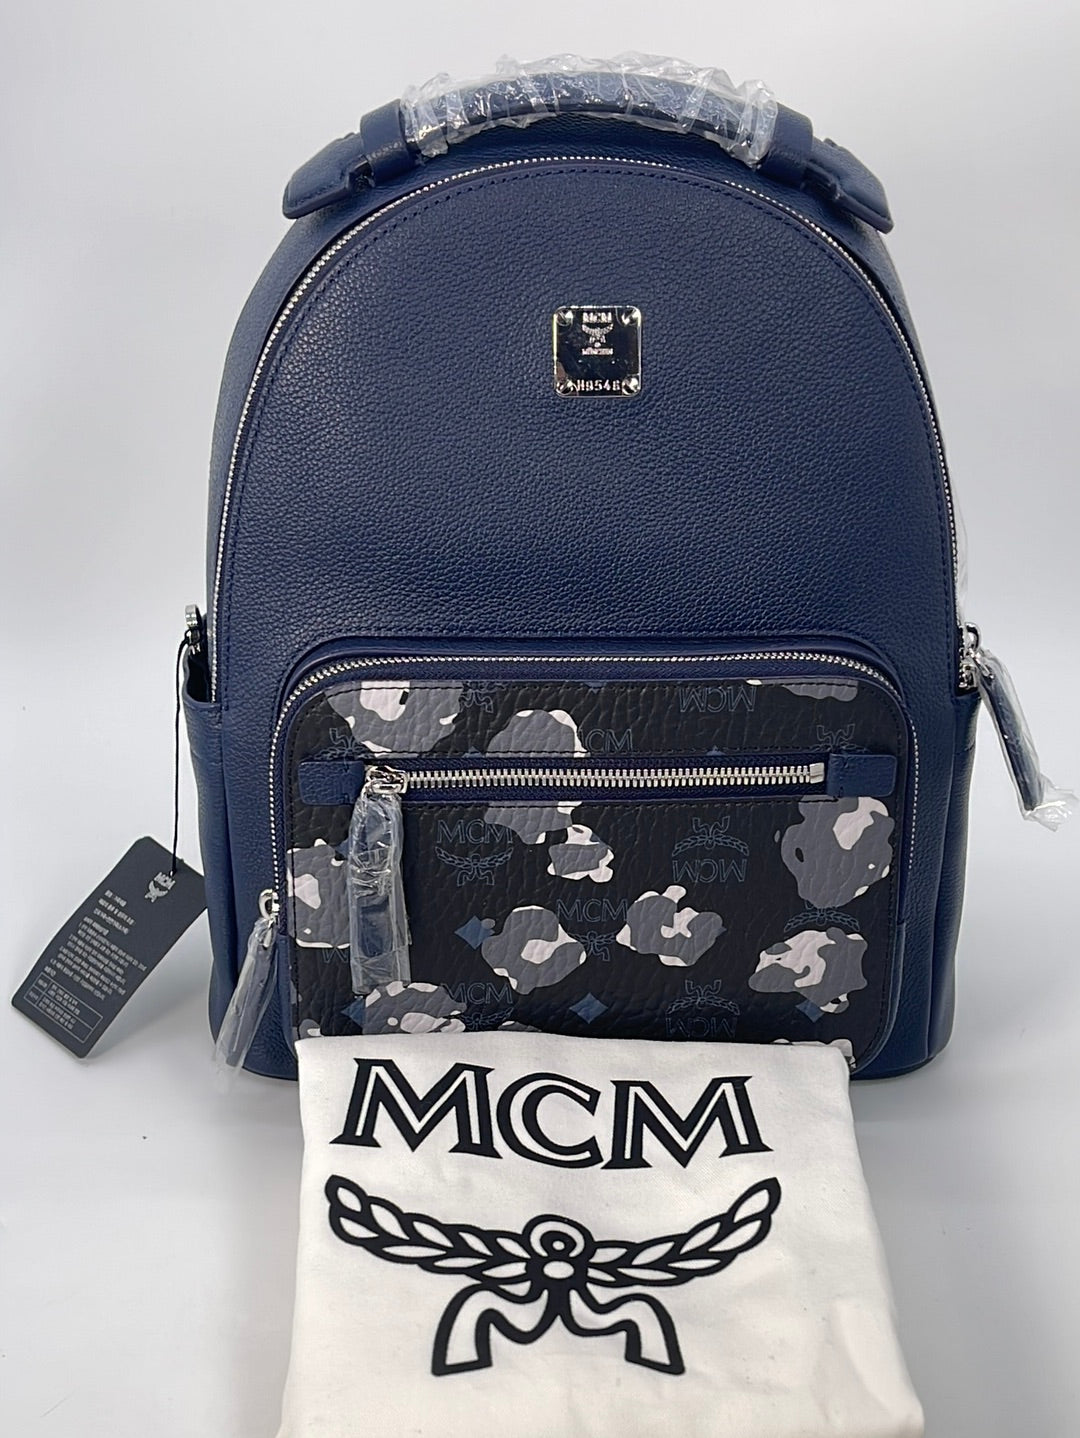 NEW) MCM Blue Leather Camo Stark Visetos Backpack H9546 022223